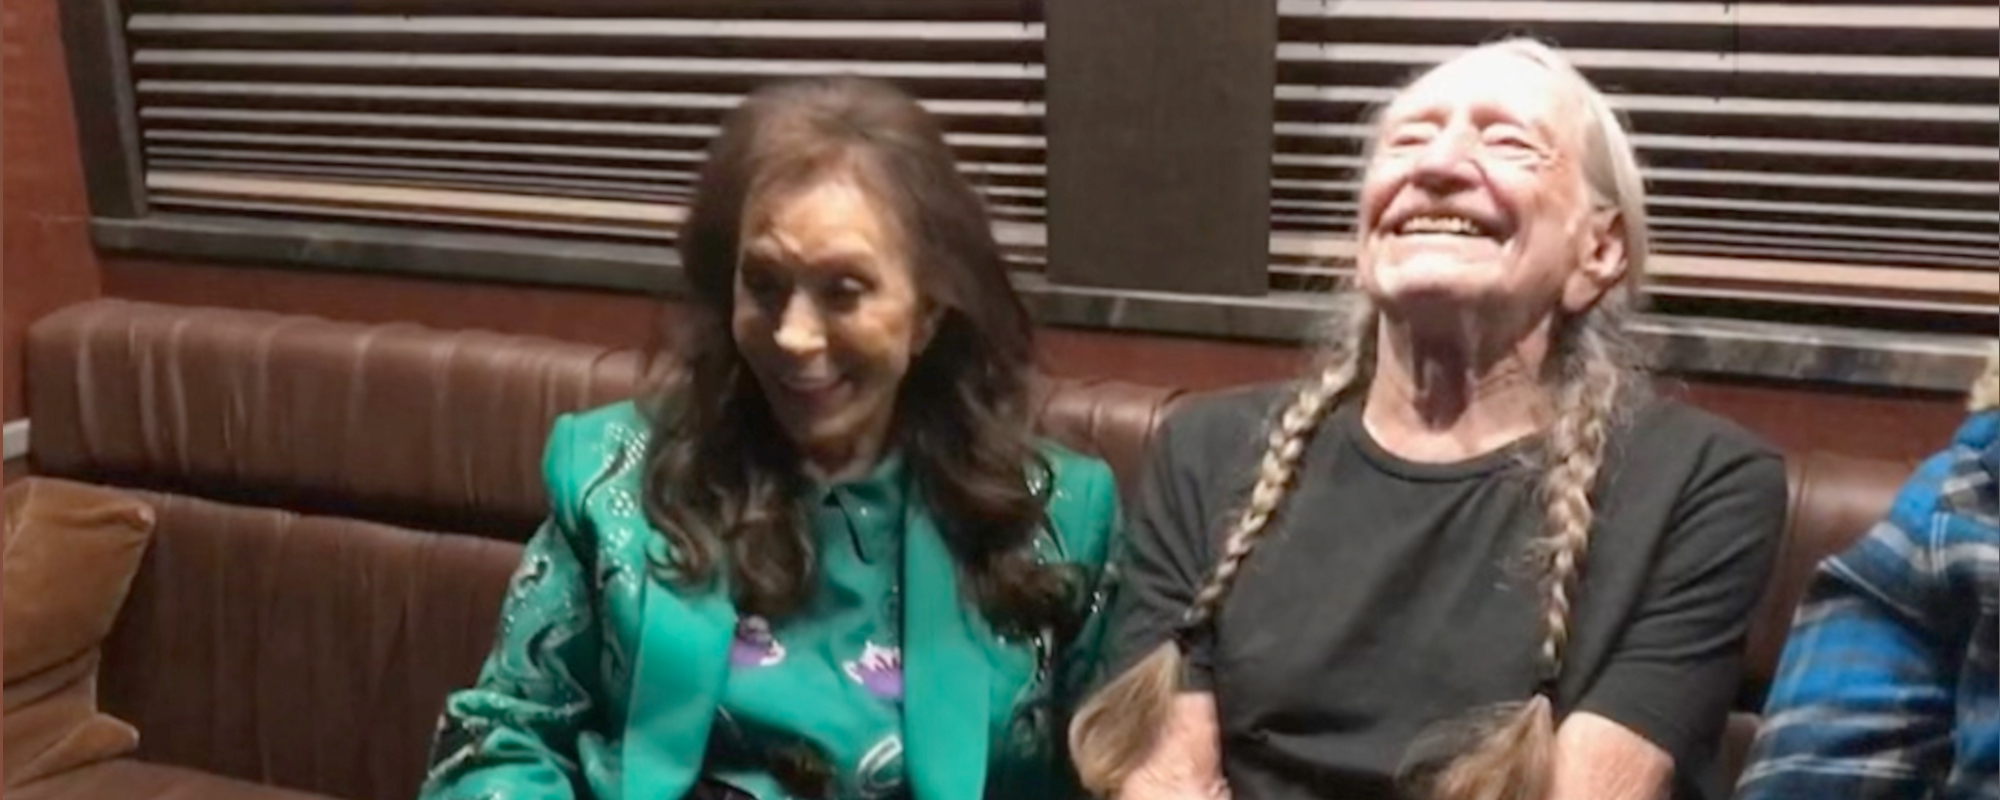 Willie Nelson Speaks Out About Death of His Friend Loretta Lynn—“I’ll Miss Her A Lot”